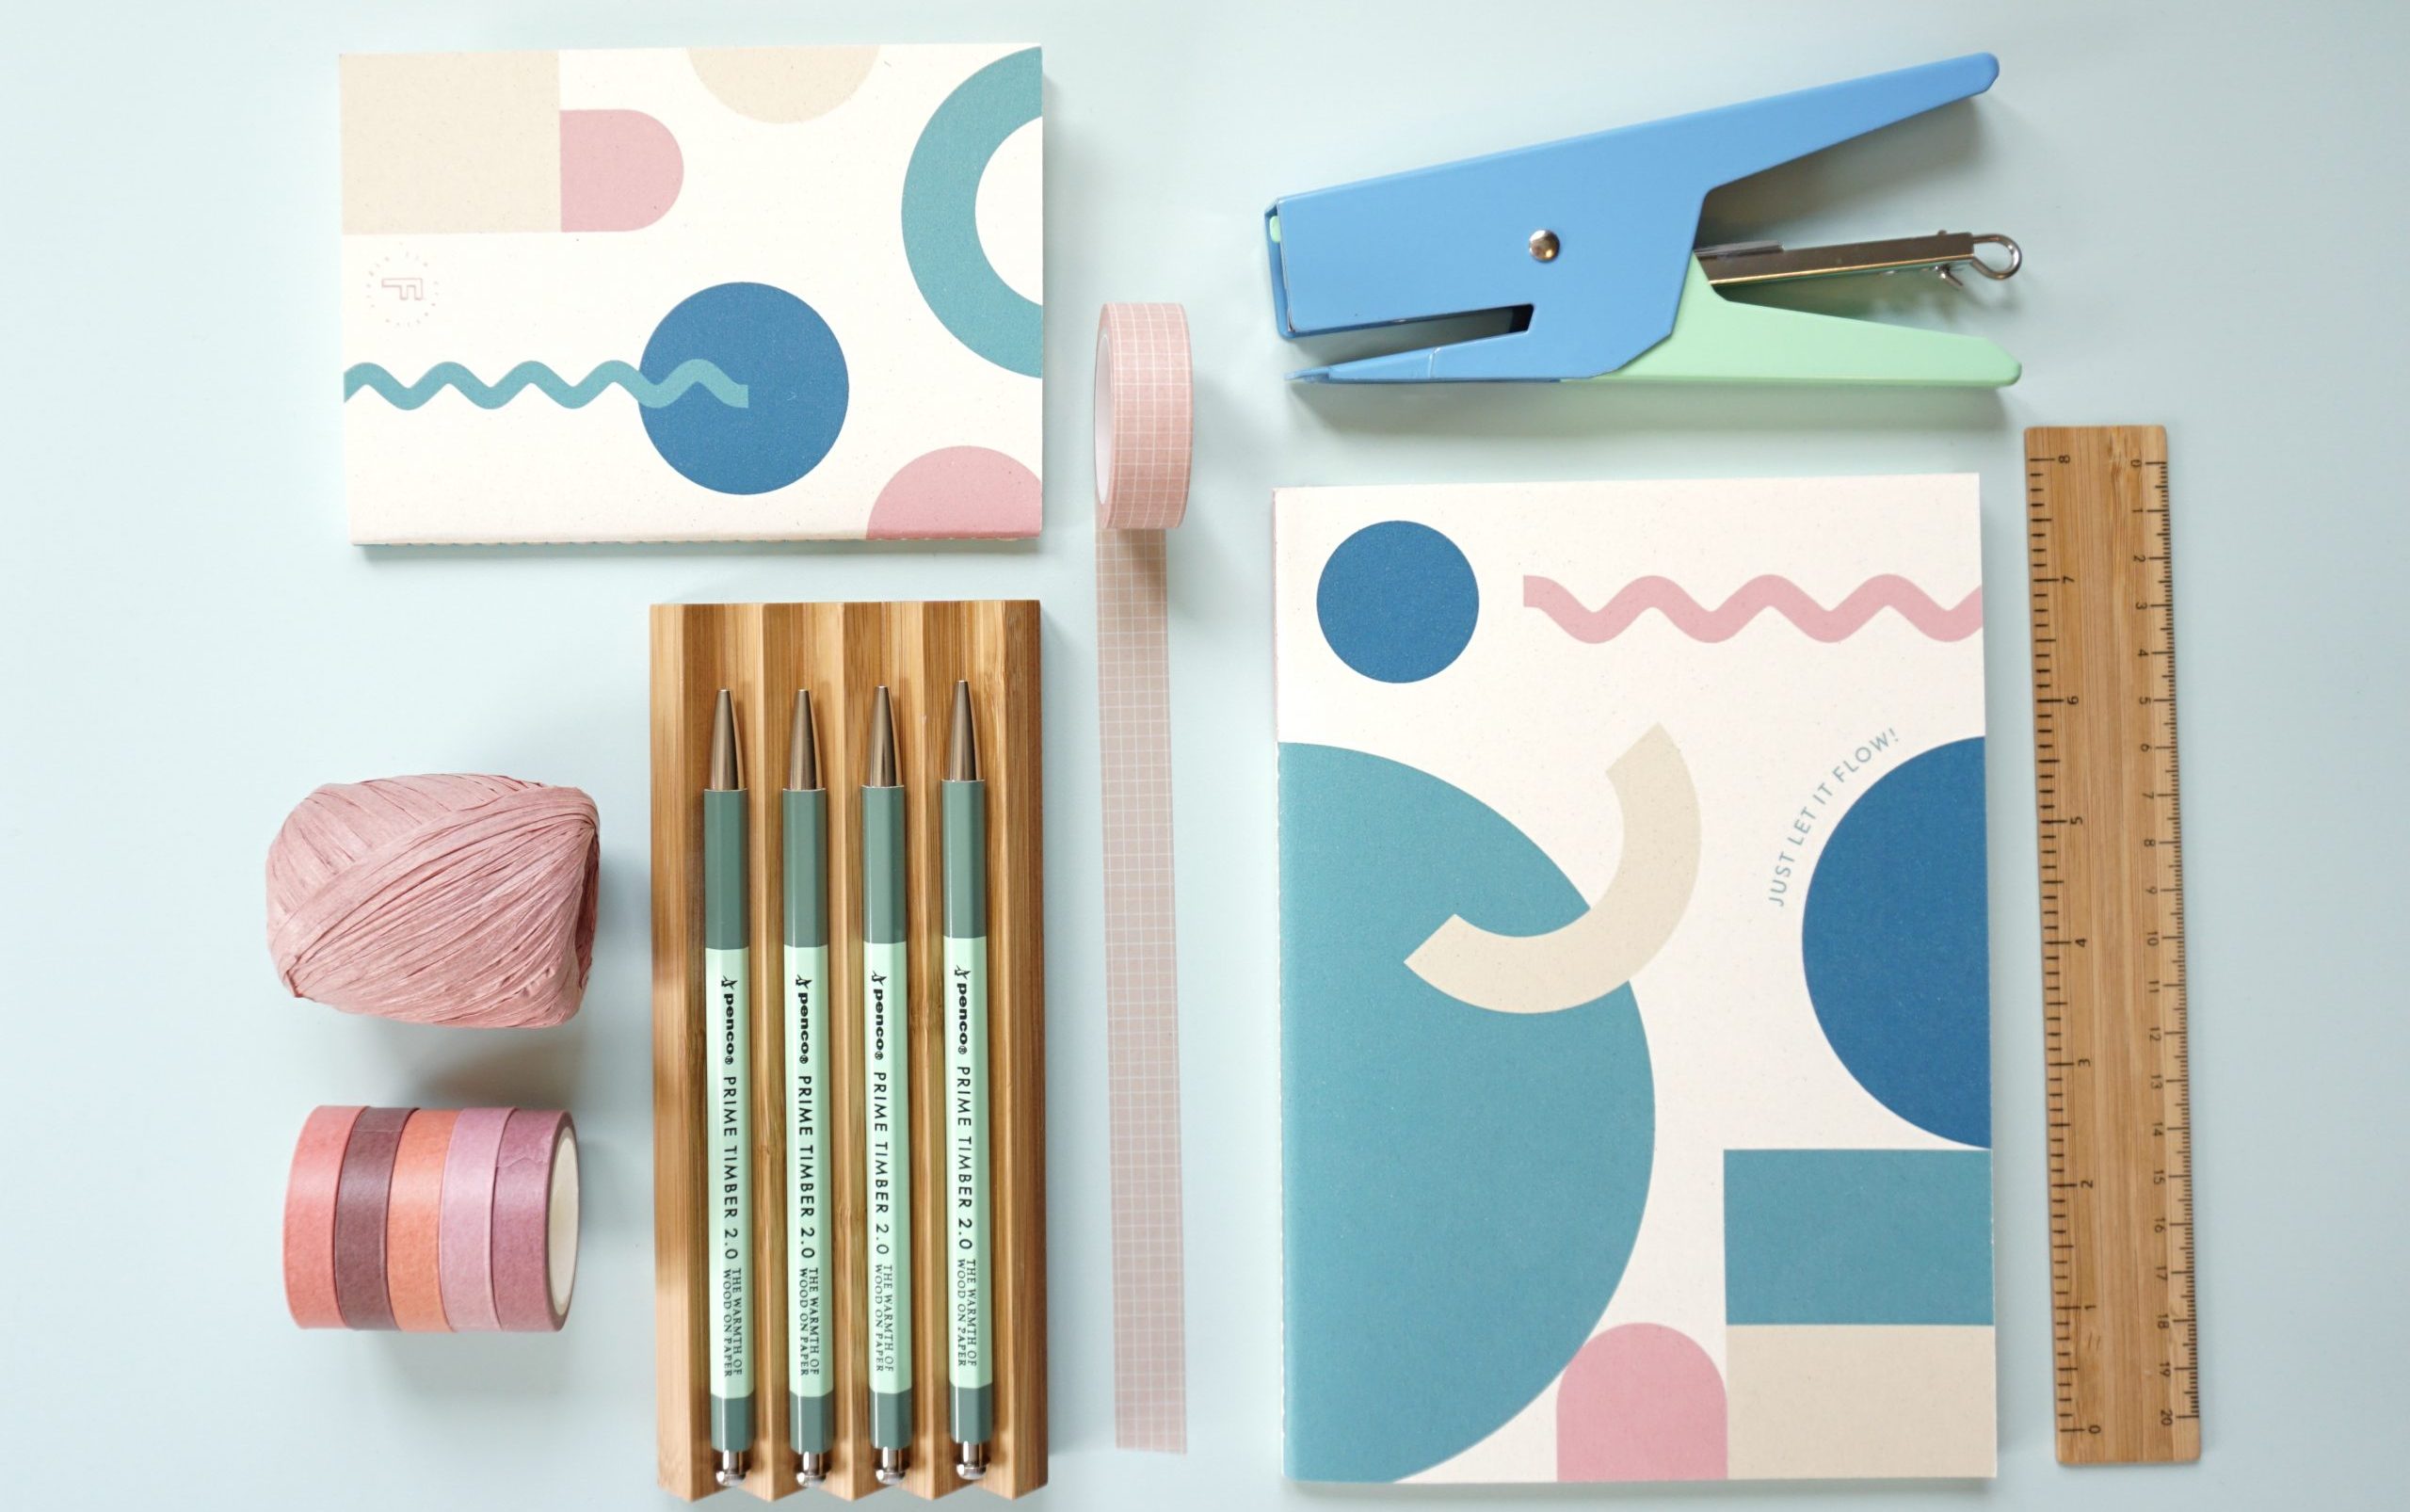 Funky stationary designed by Ozge Coskun taking inspiration from the shapes and colours of the sea